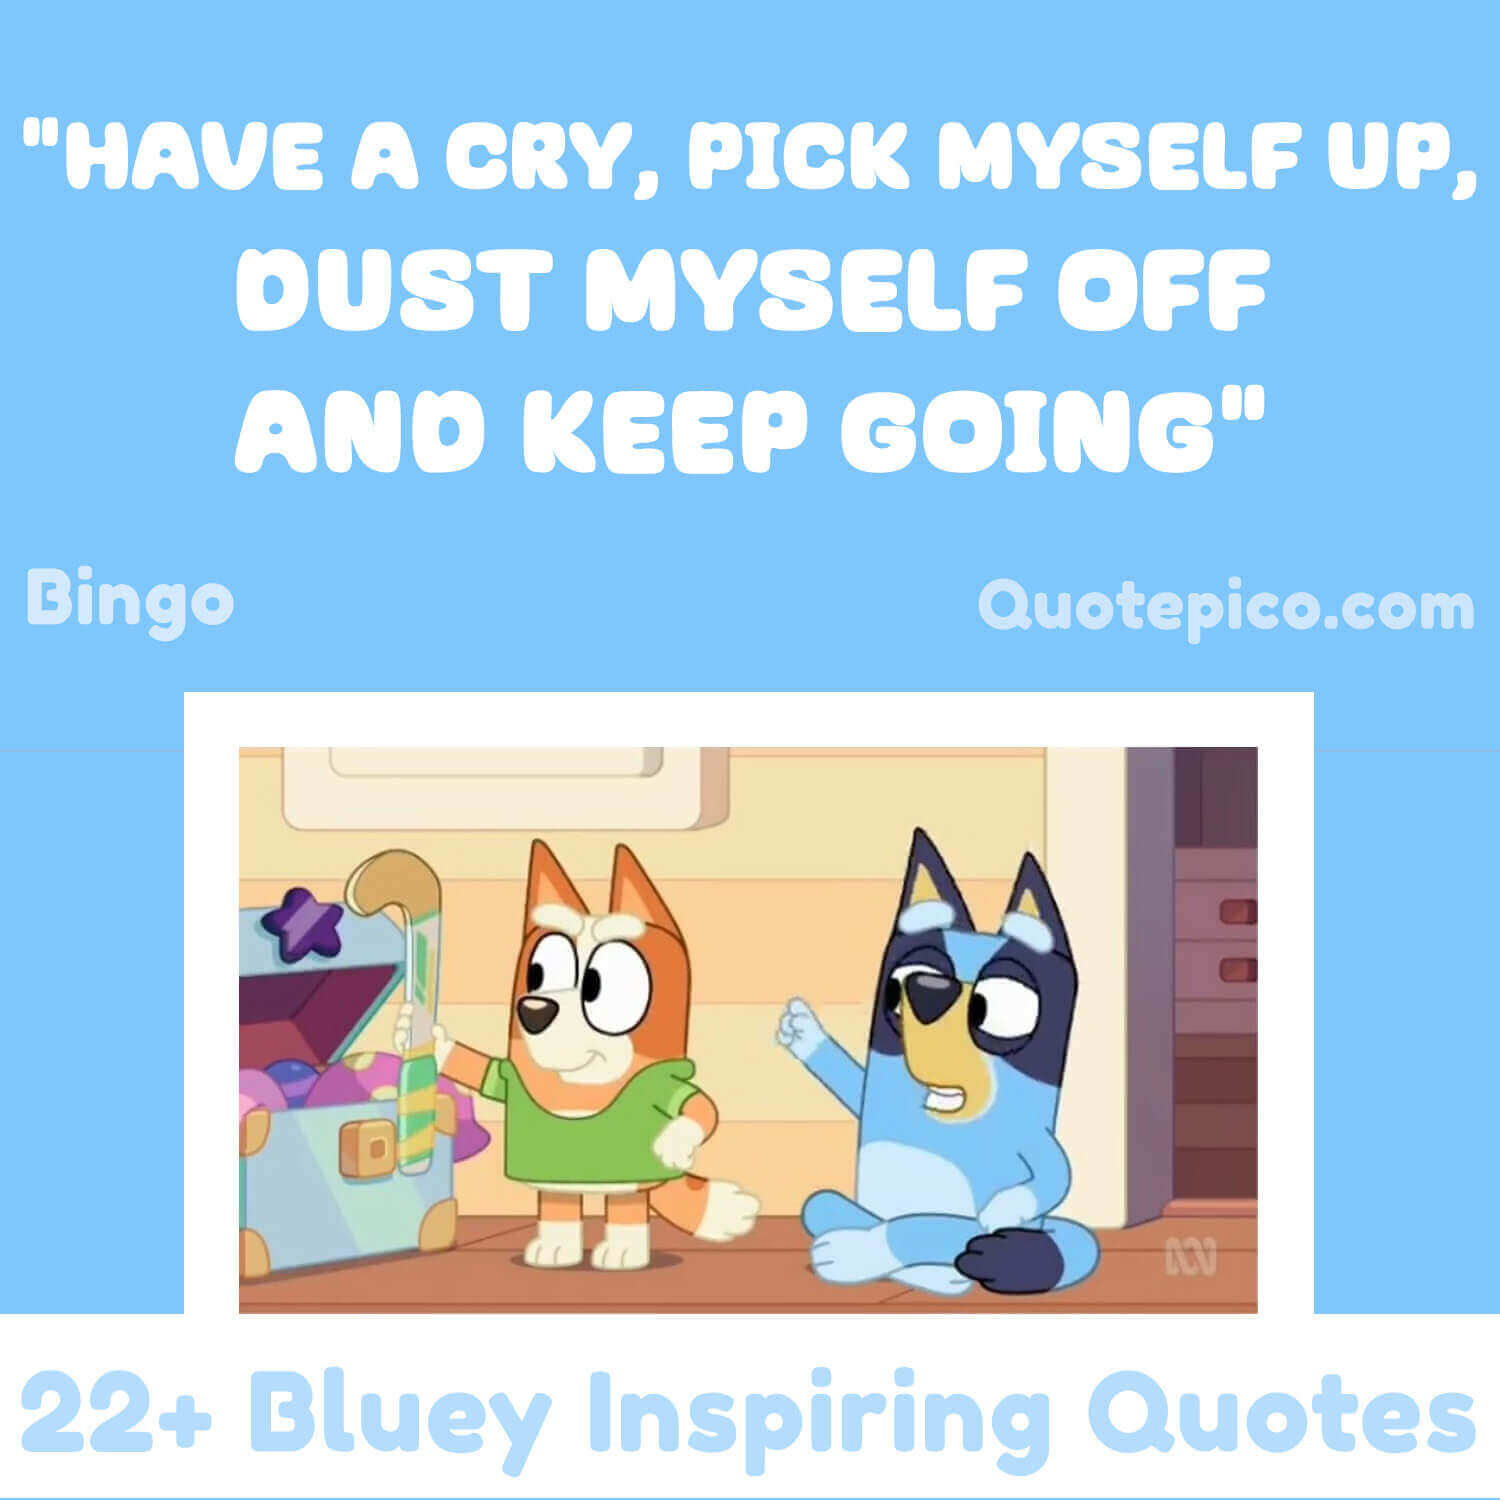 34-bluey-quotes-inspiring-funny-lines-from-chilli-bingo-bluey